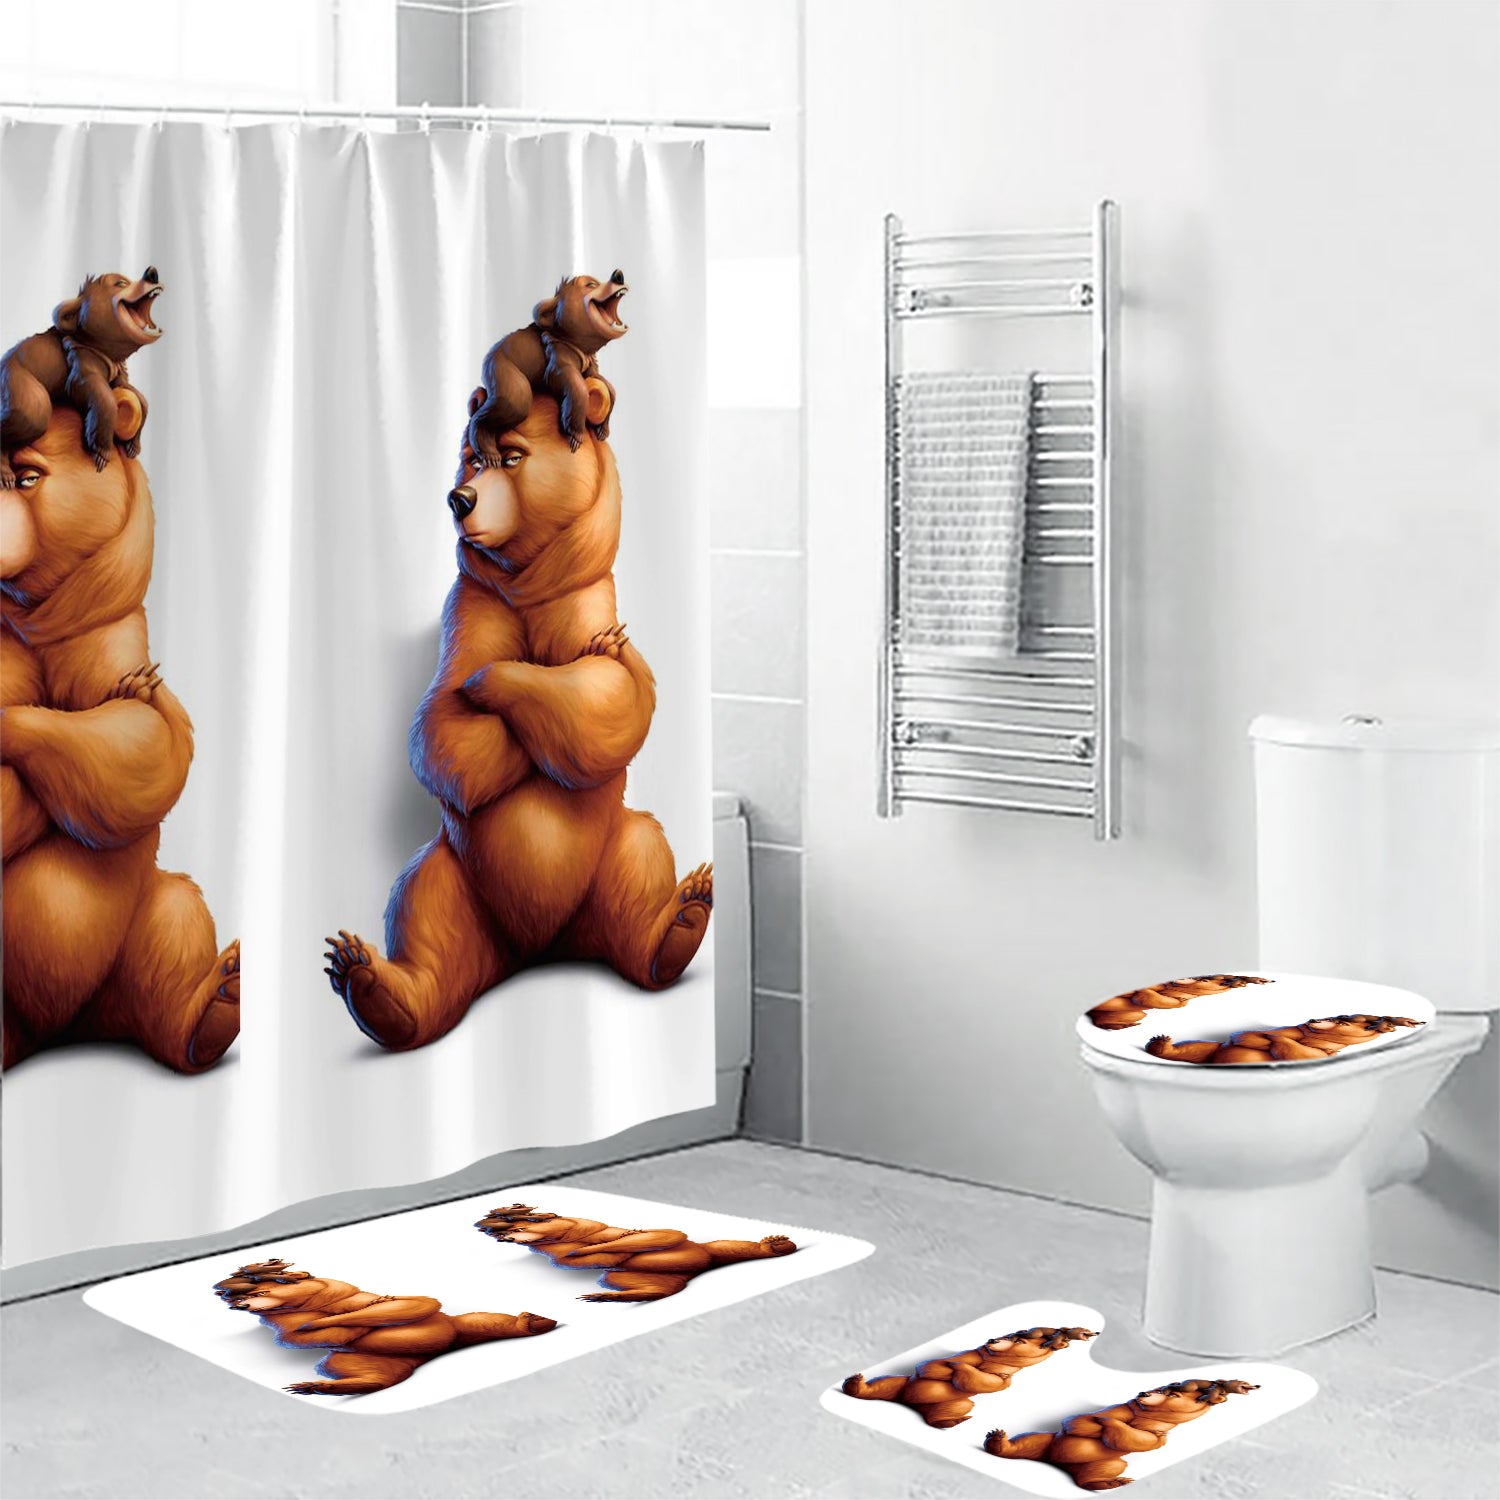 Brother Bear Poster 8 4PCS Shower Curtain Non-Slip Toilet Lid Cover Bath Mat - Bathroom Set Fans Gifts